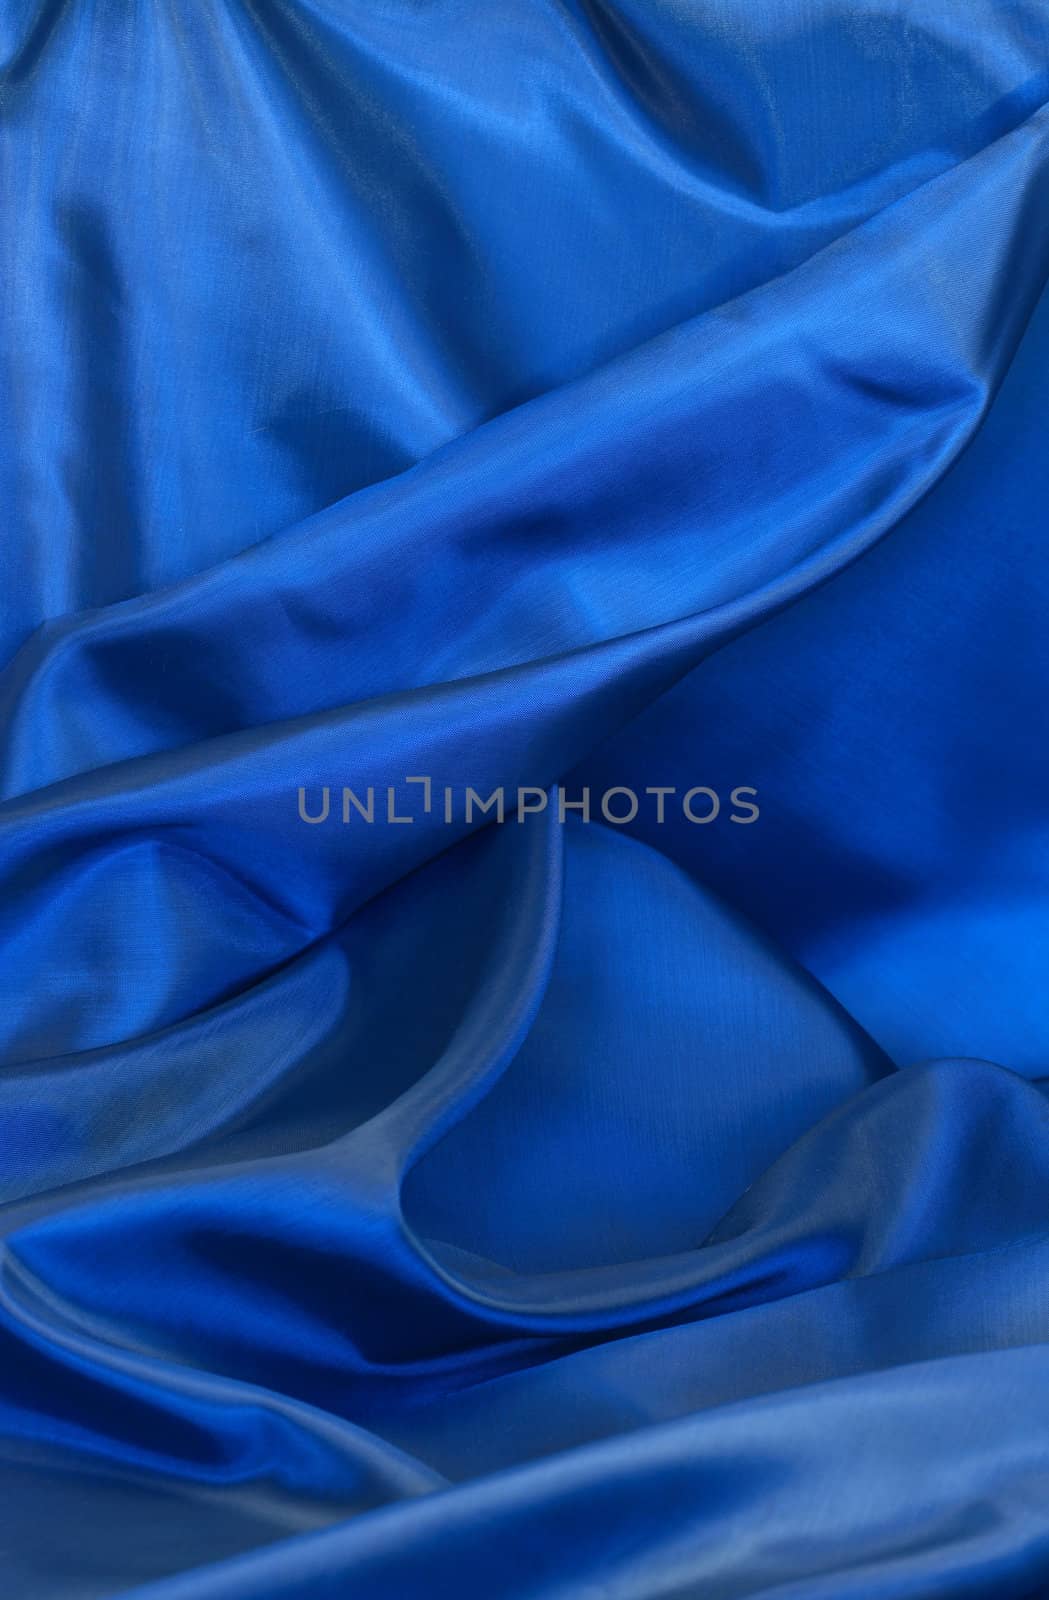 Background made from nice smooth blue textile